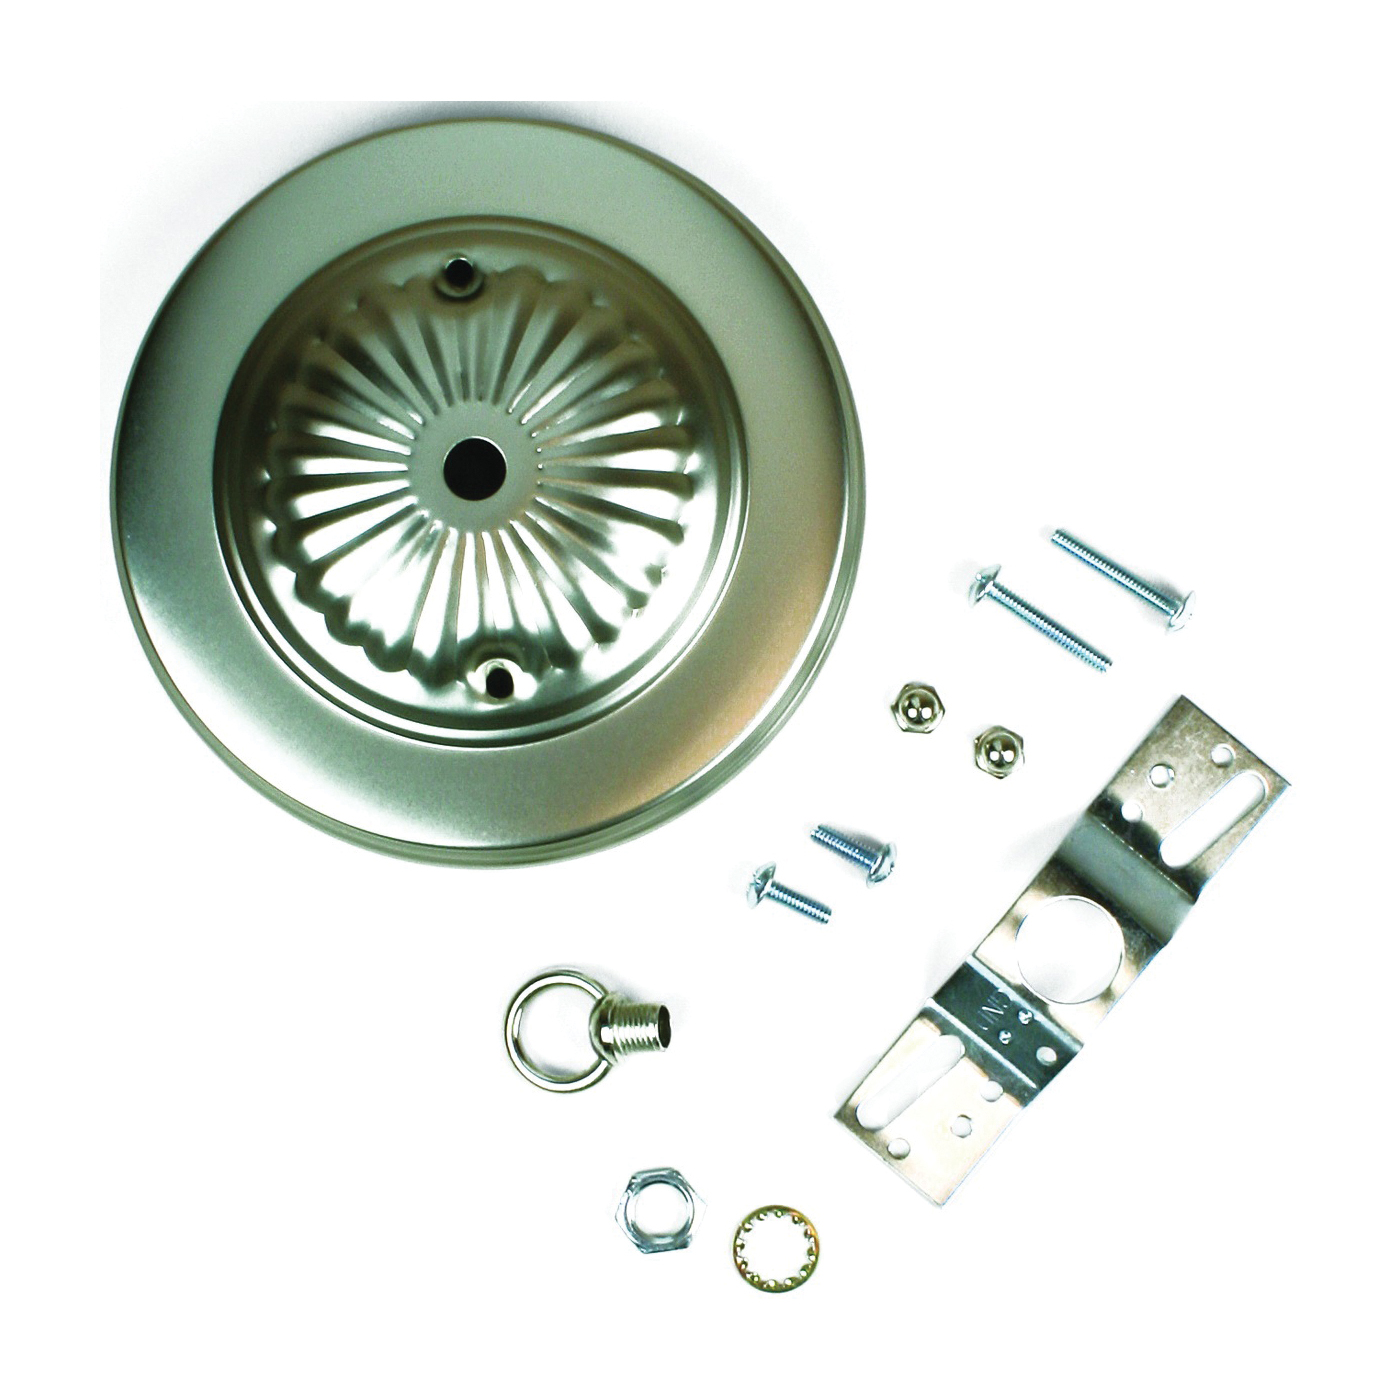 60216 Canopy Kit, Ceiling, Traditional, Brushed Pewter, For: Outlet Box and Hang Ceiling Fixture